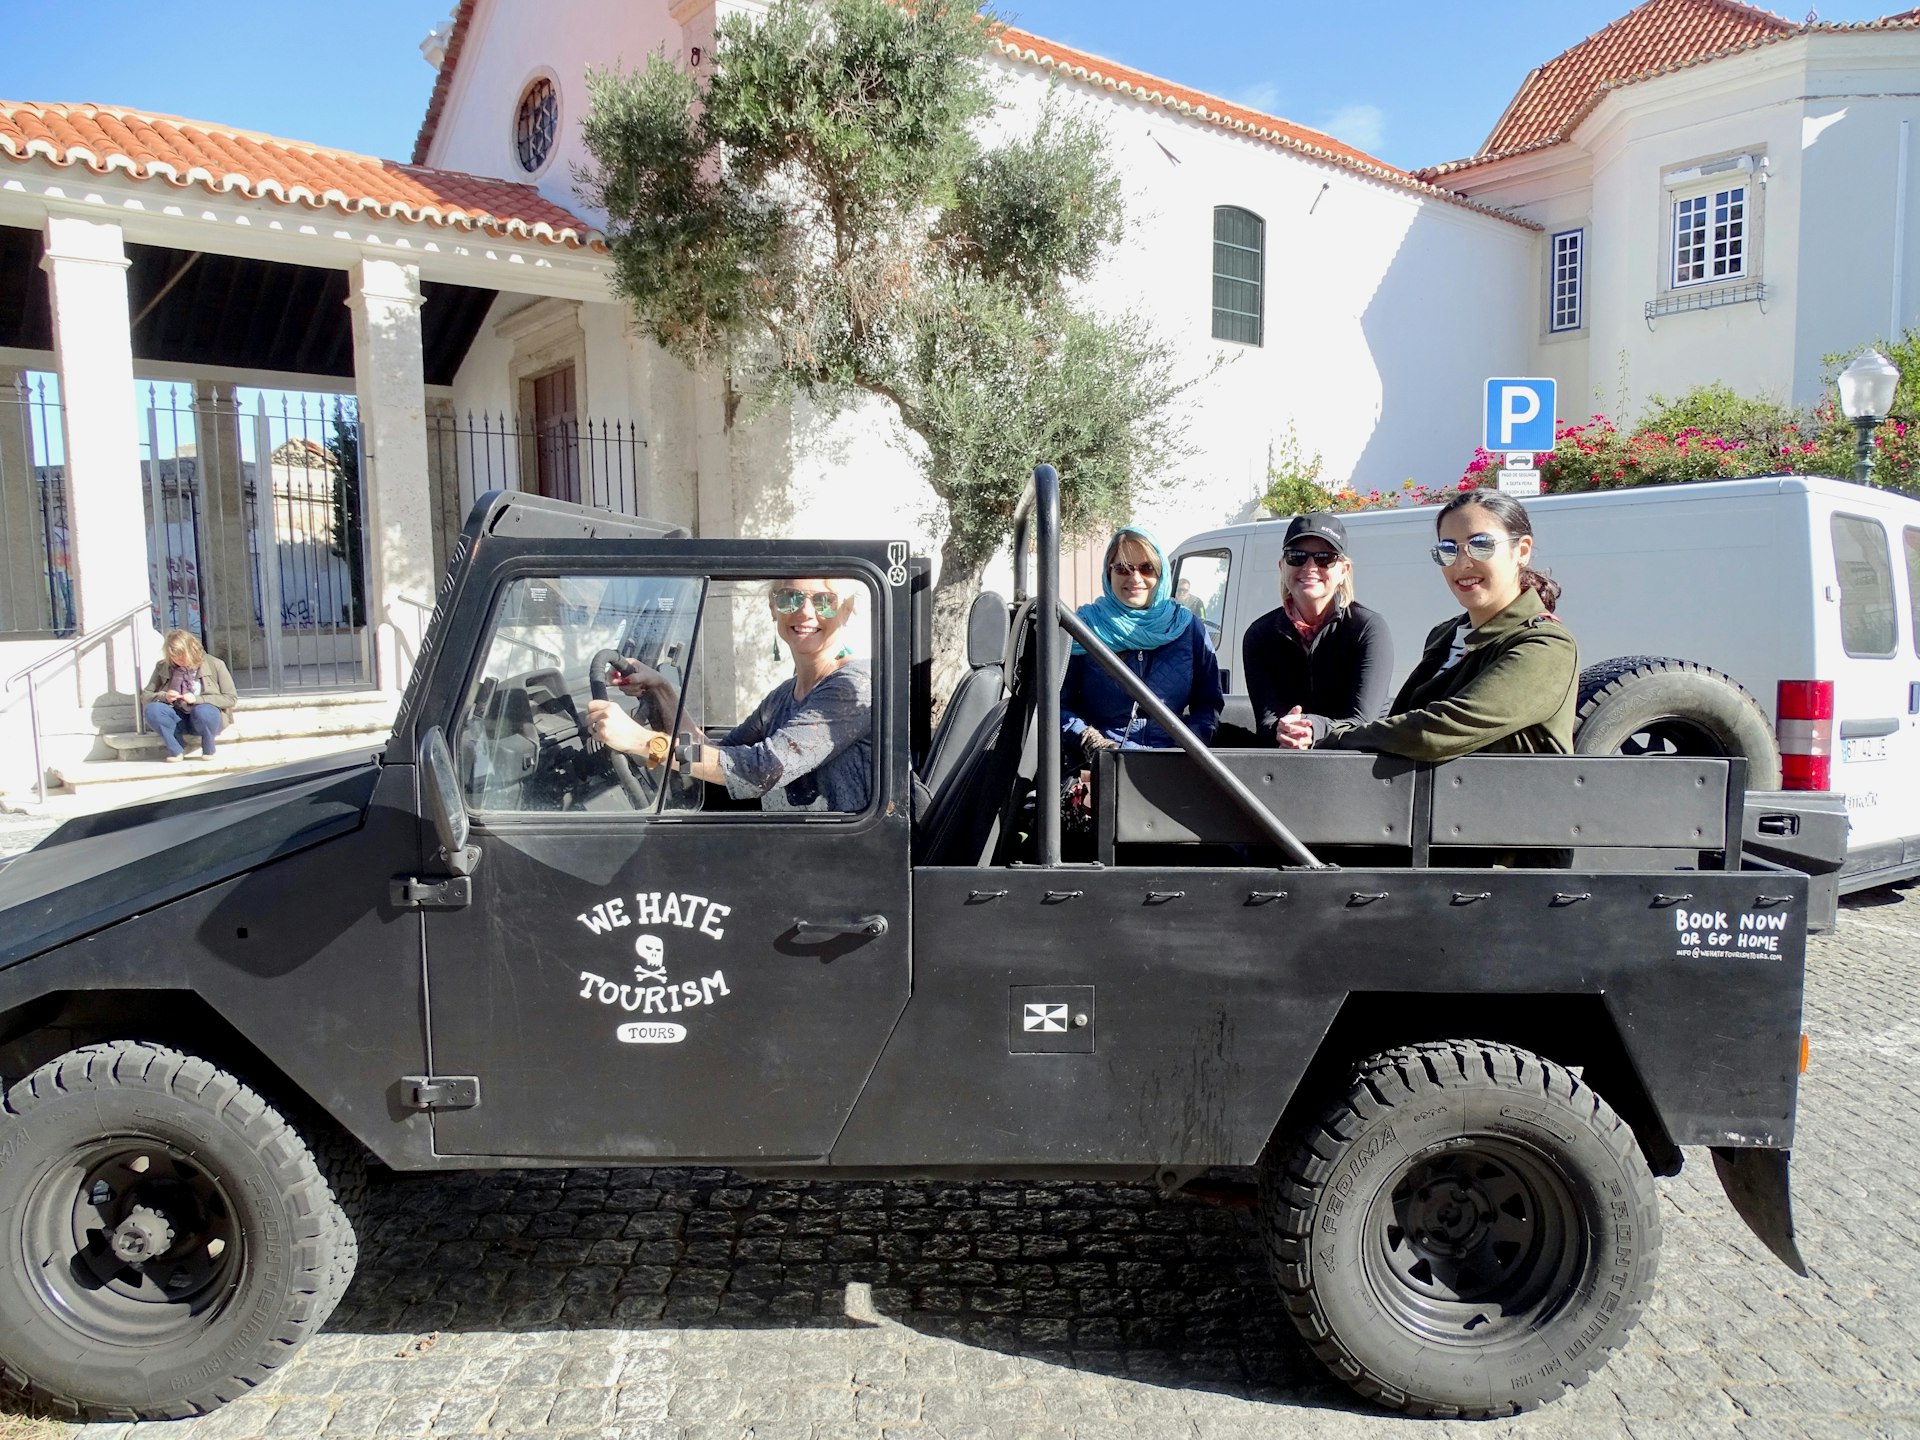 A black open-top jeep in Lisbon with "We Hate Tourism" stamped on the side.